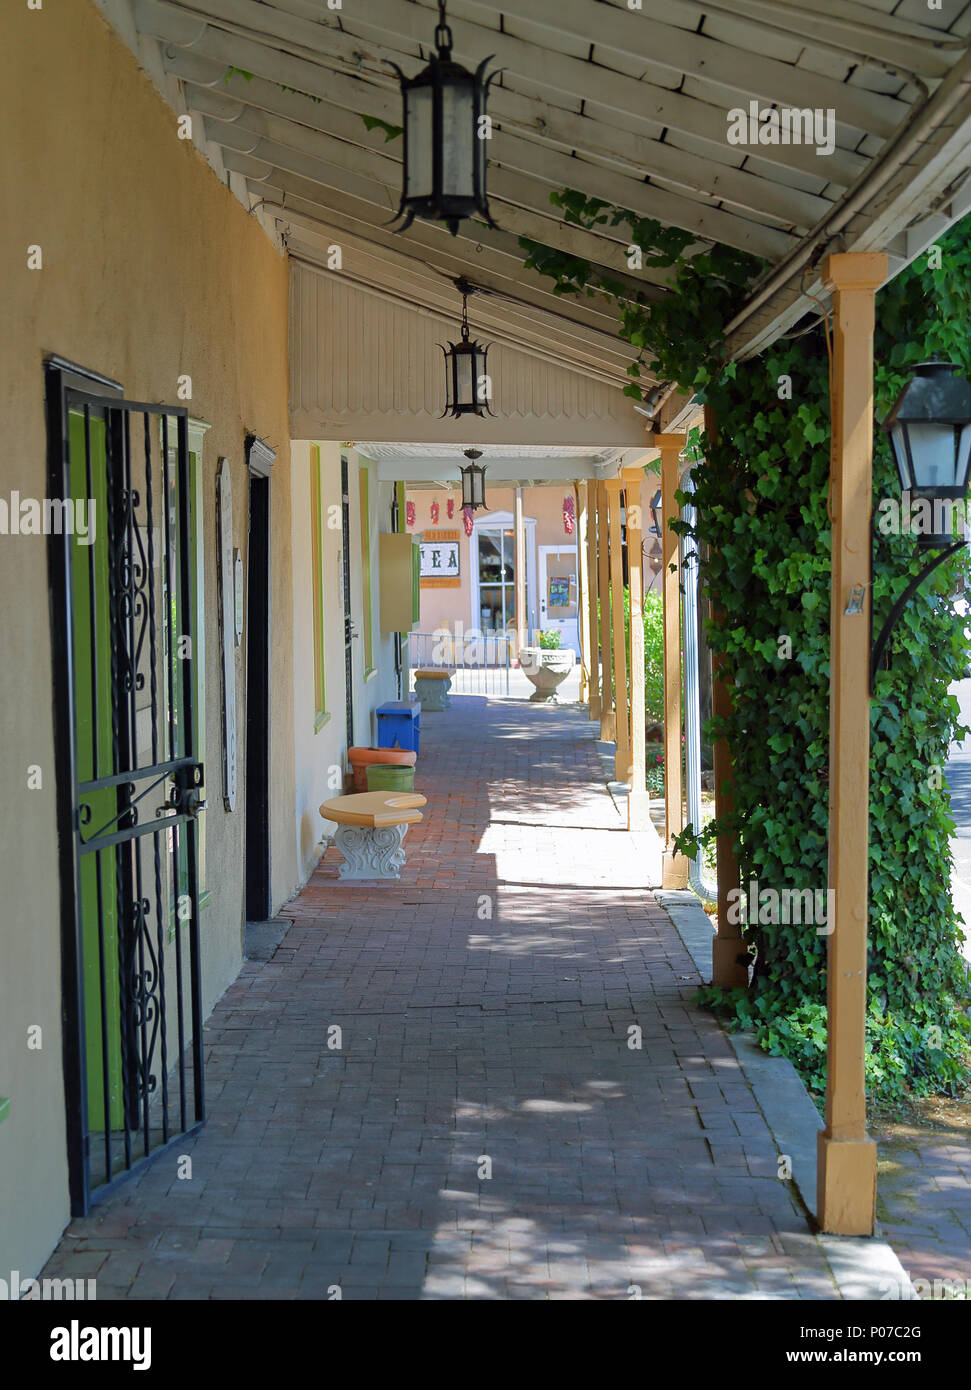 Storefront walkway with overhang with vines in Old Town Albuquerque Stock Photo